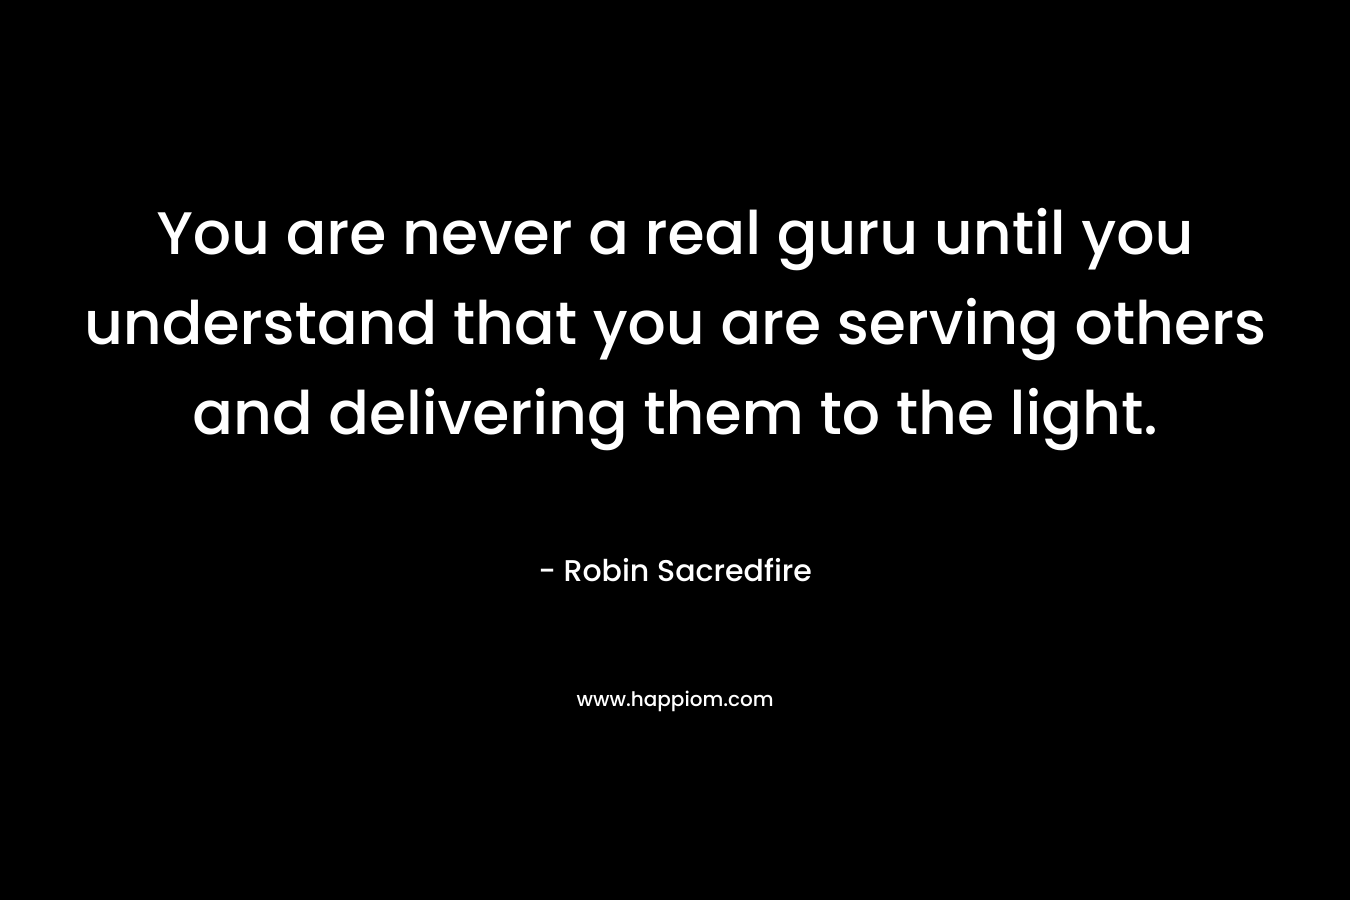 You are never a real guru until you understand that you are serving others and delivering them to the light. – Robin Sacredfire